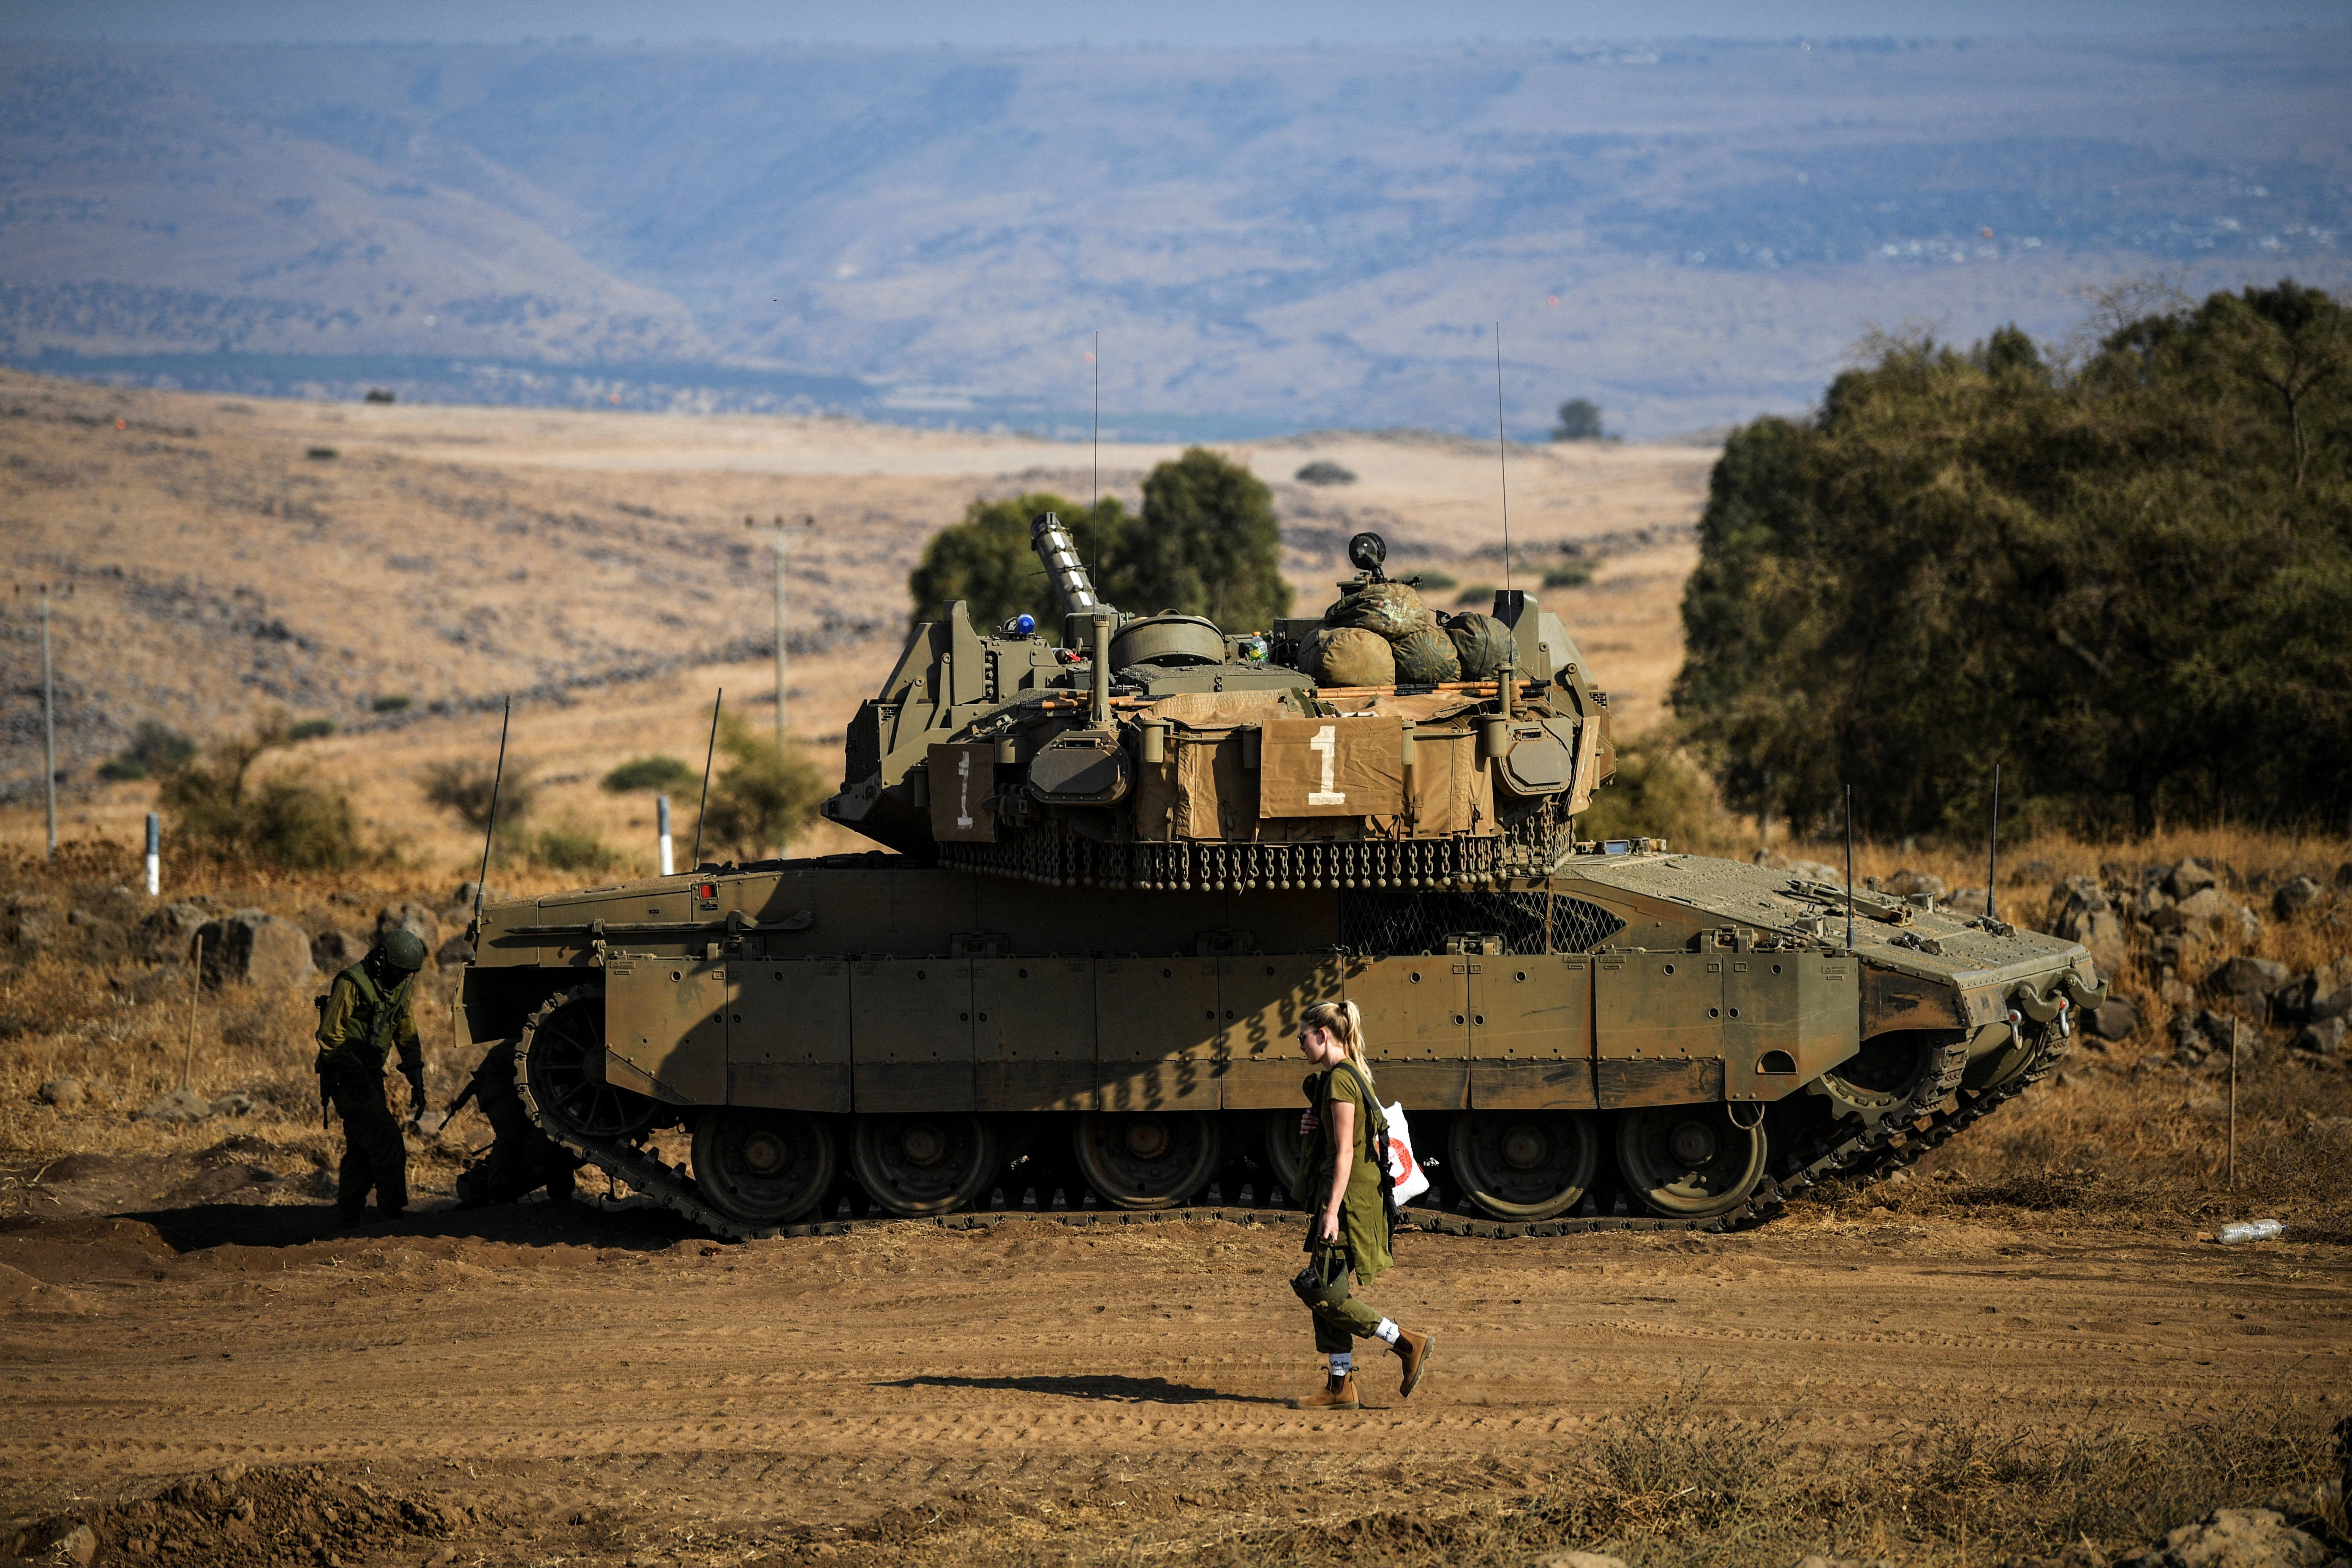 An Israeli soldier walks past a tank amid heightened tensions between Israel and Lebanon, as seen from the border with Lebanon in northern Israel